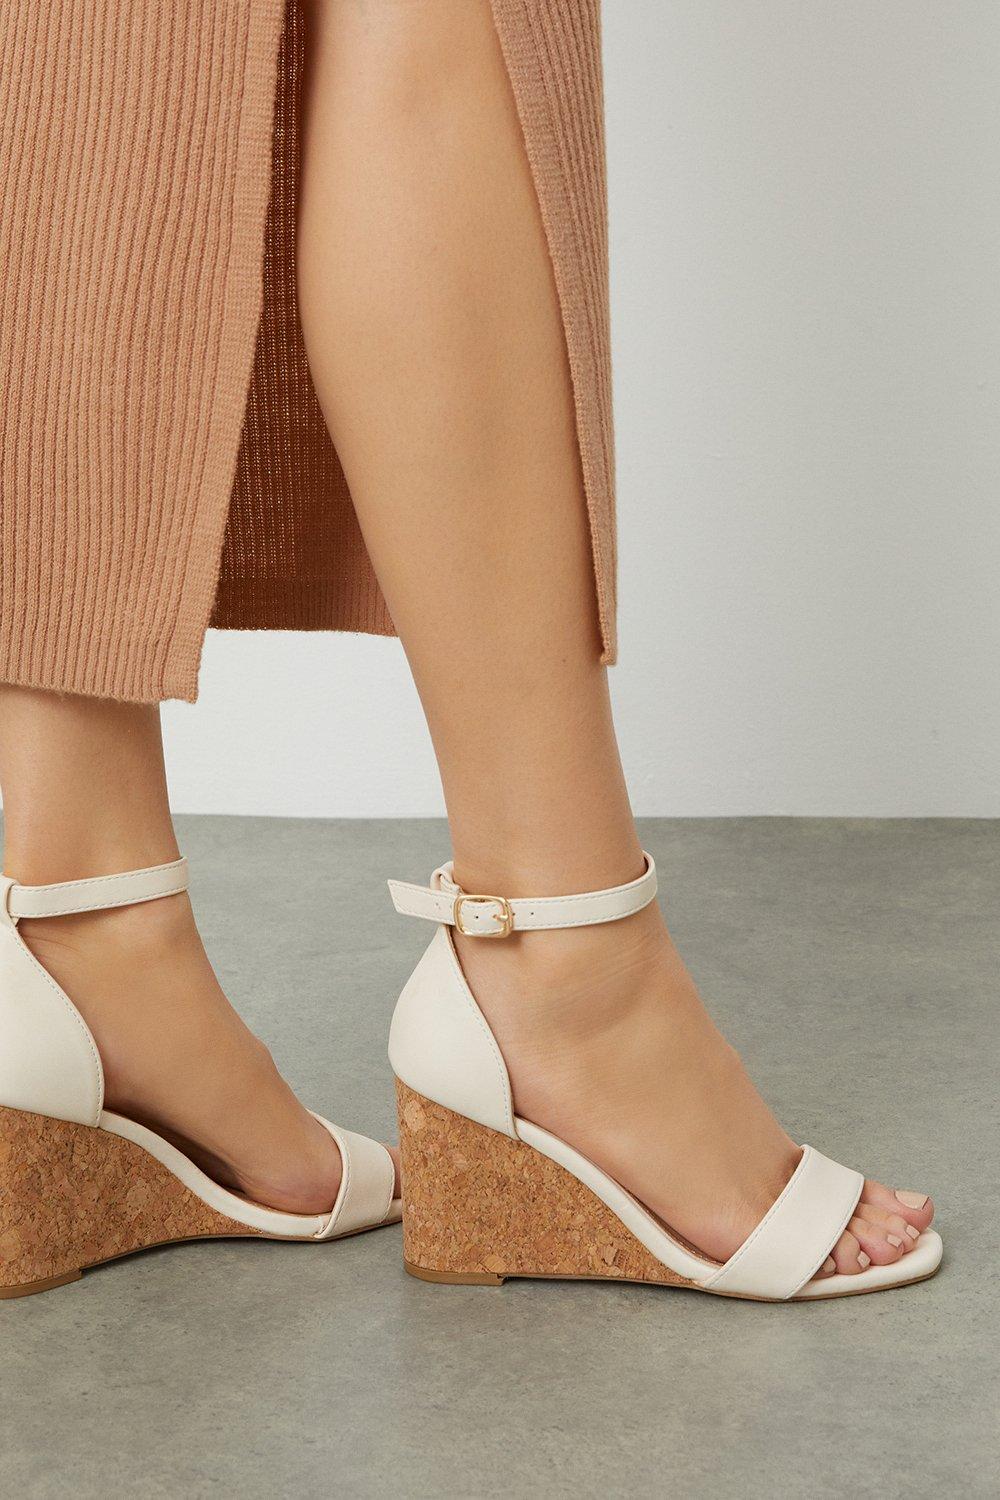 Women’s Wide Fit Rocco Barely There Wedges - cream - 6